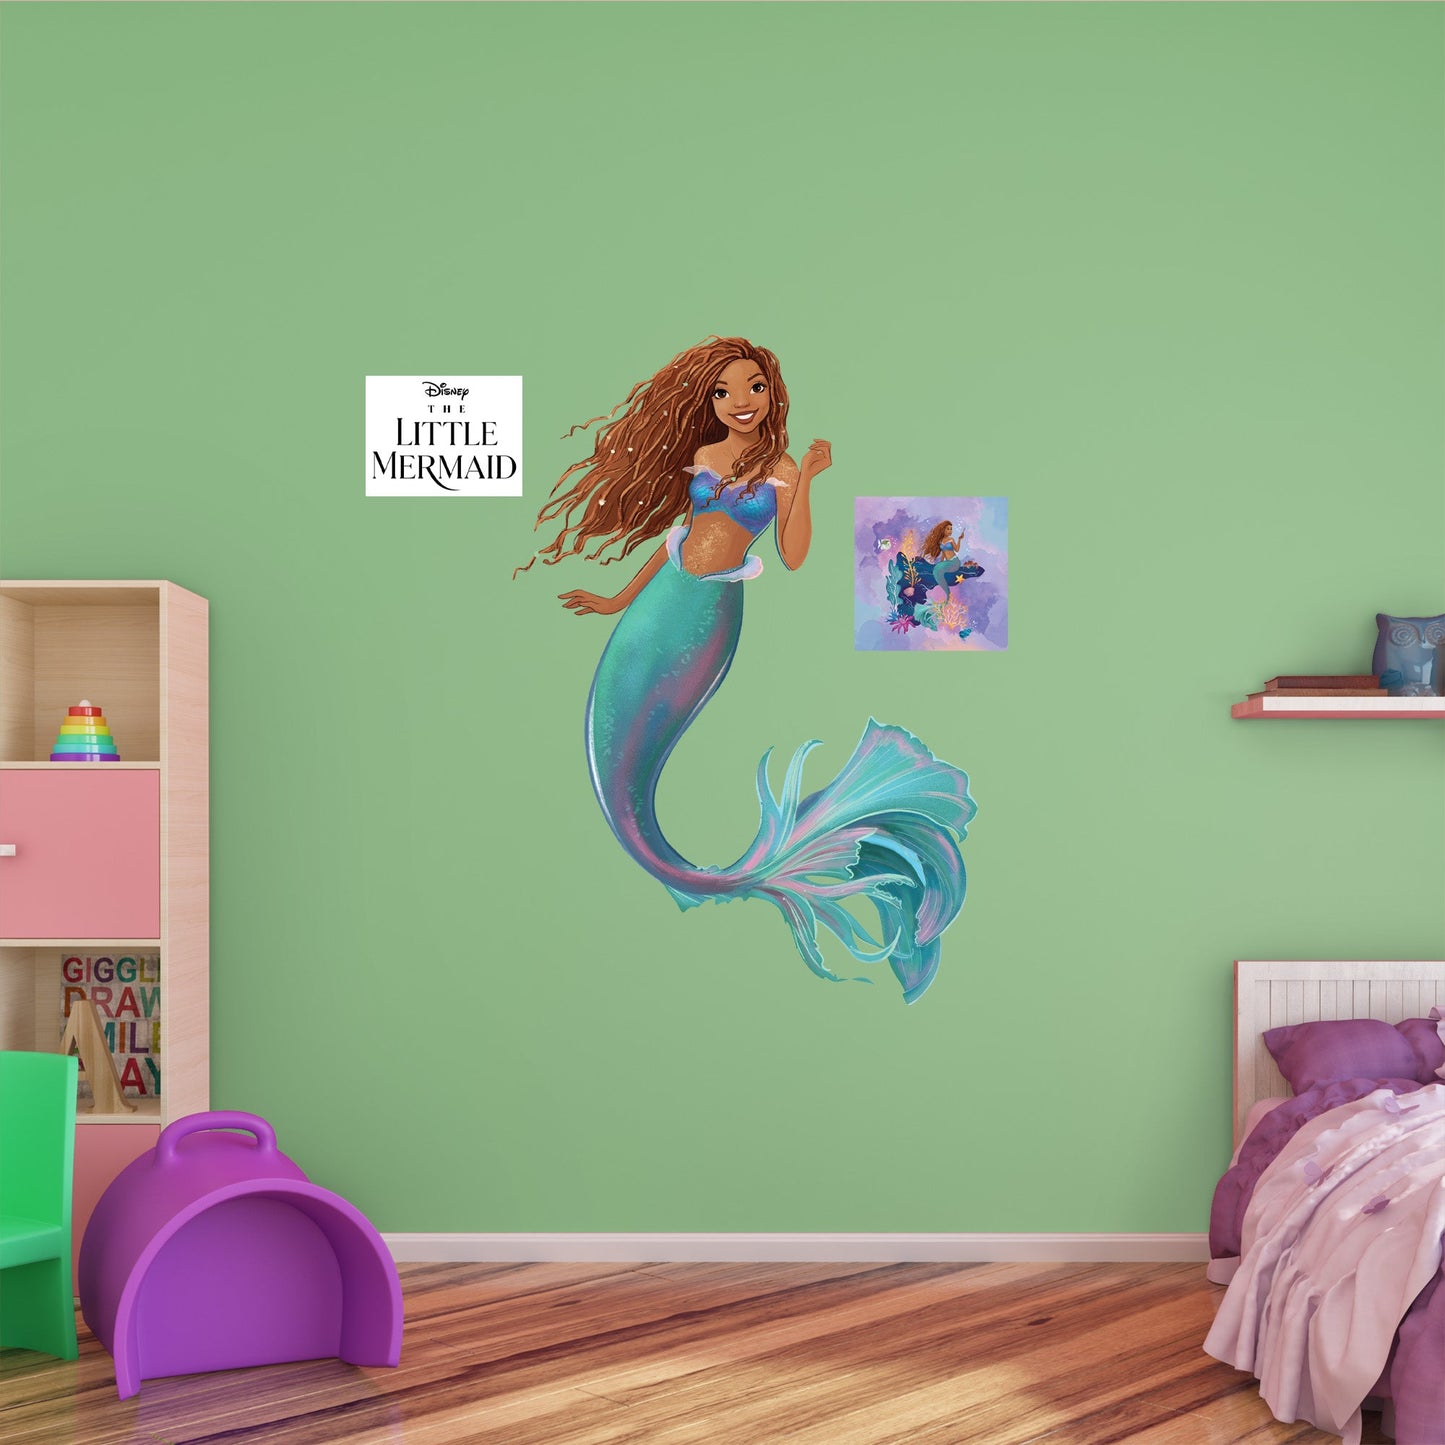 The Little Mermaid: Ariel Shimmering Seas RealBig        - Officially Licensed Disney Removable     Adhesive Decal